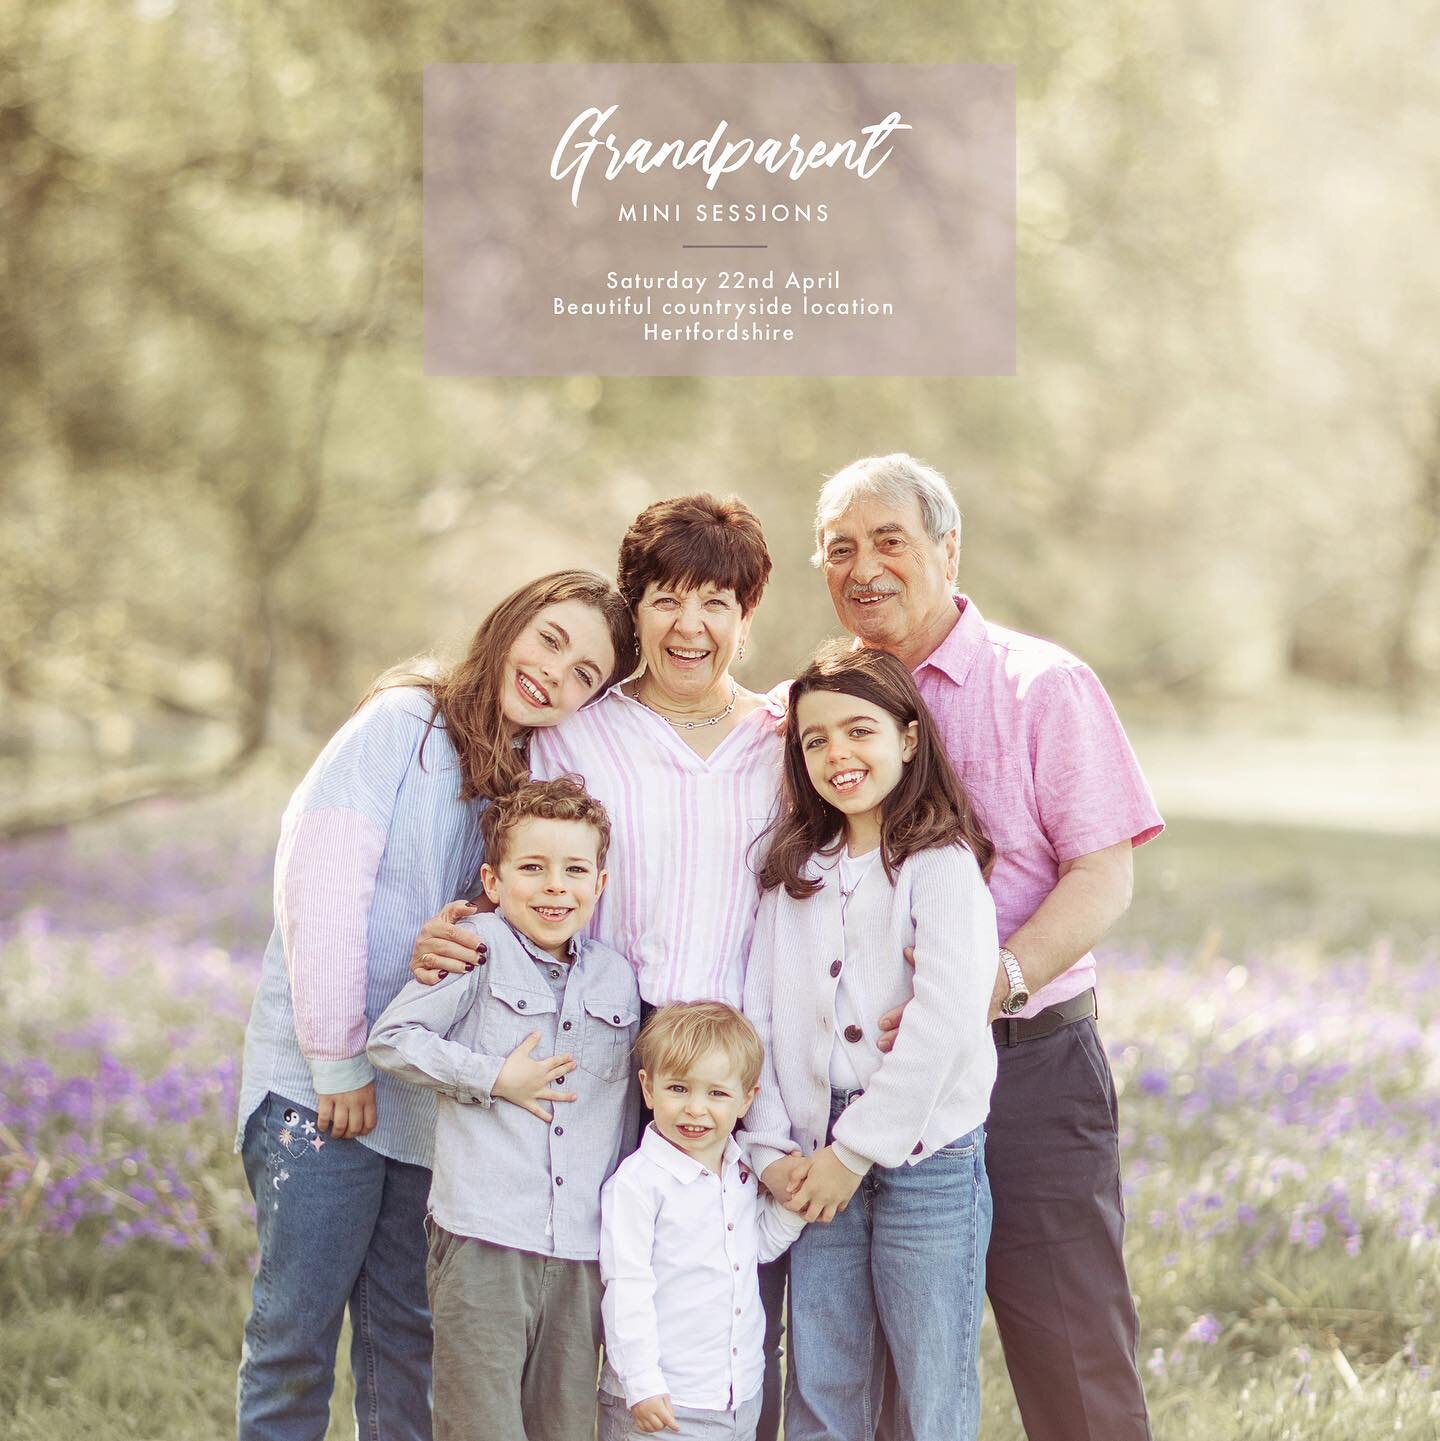 ***SOLD OUT*** Grandparent Mini Sessions | Spring | Saturday 22nd April 2023

An incredibly special and heartwarming session | Grandparents and their beloved family.

40 minute sessions focused on the Grandparents, to include the whole family, siblin